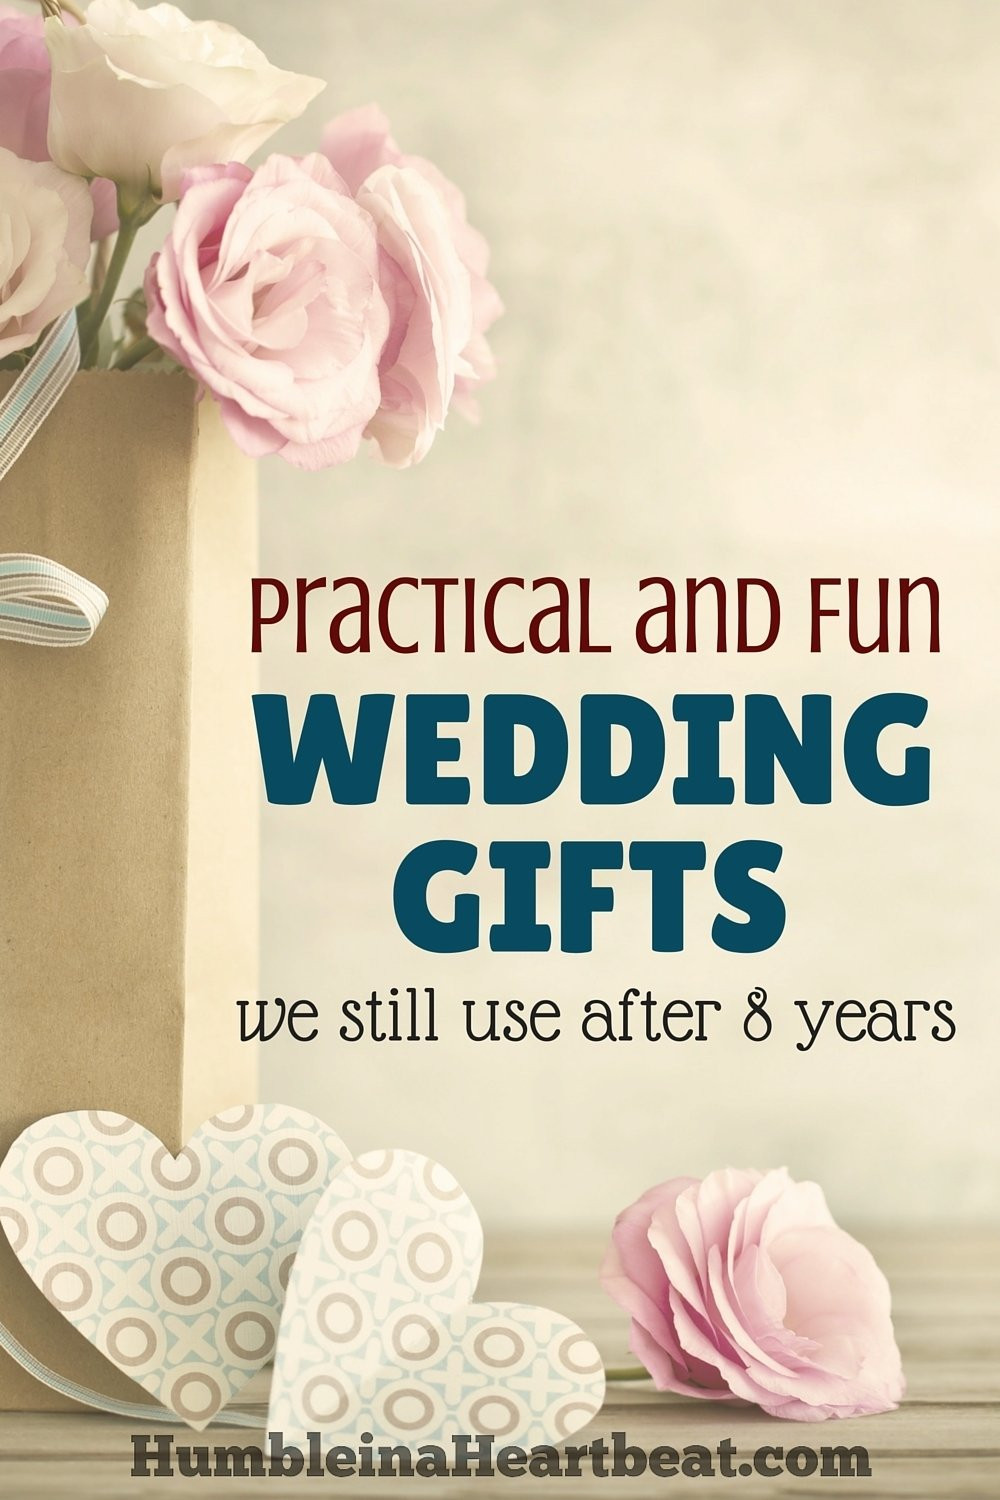 Gift Ideas For Newly Married Couple
 10 Fabulous Gift Ideas For Married Couples 2020